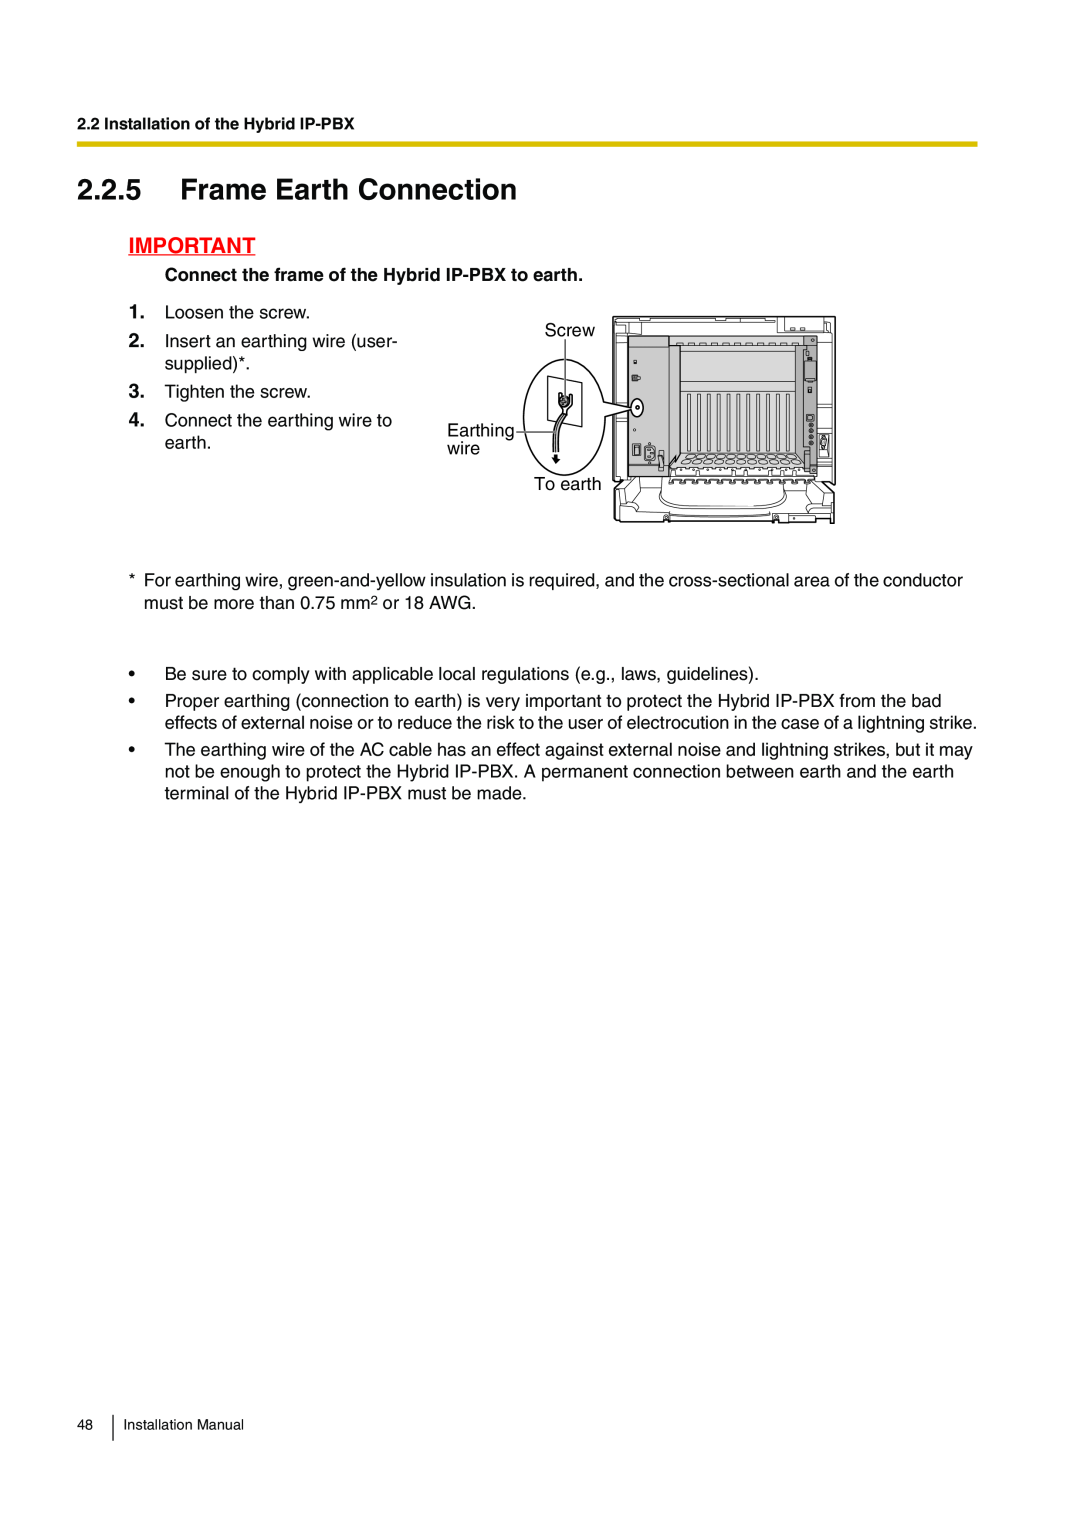 Panasonic KX-TDA100 installation manual Frame Earth Connection, Connect the frame of the Hybrid IP-PBX to earth 